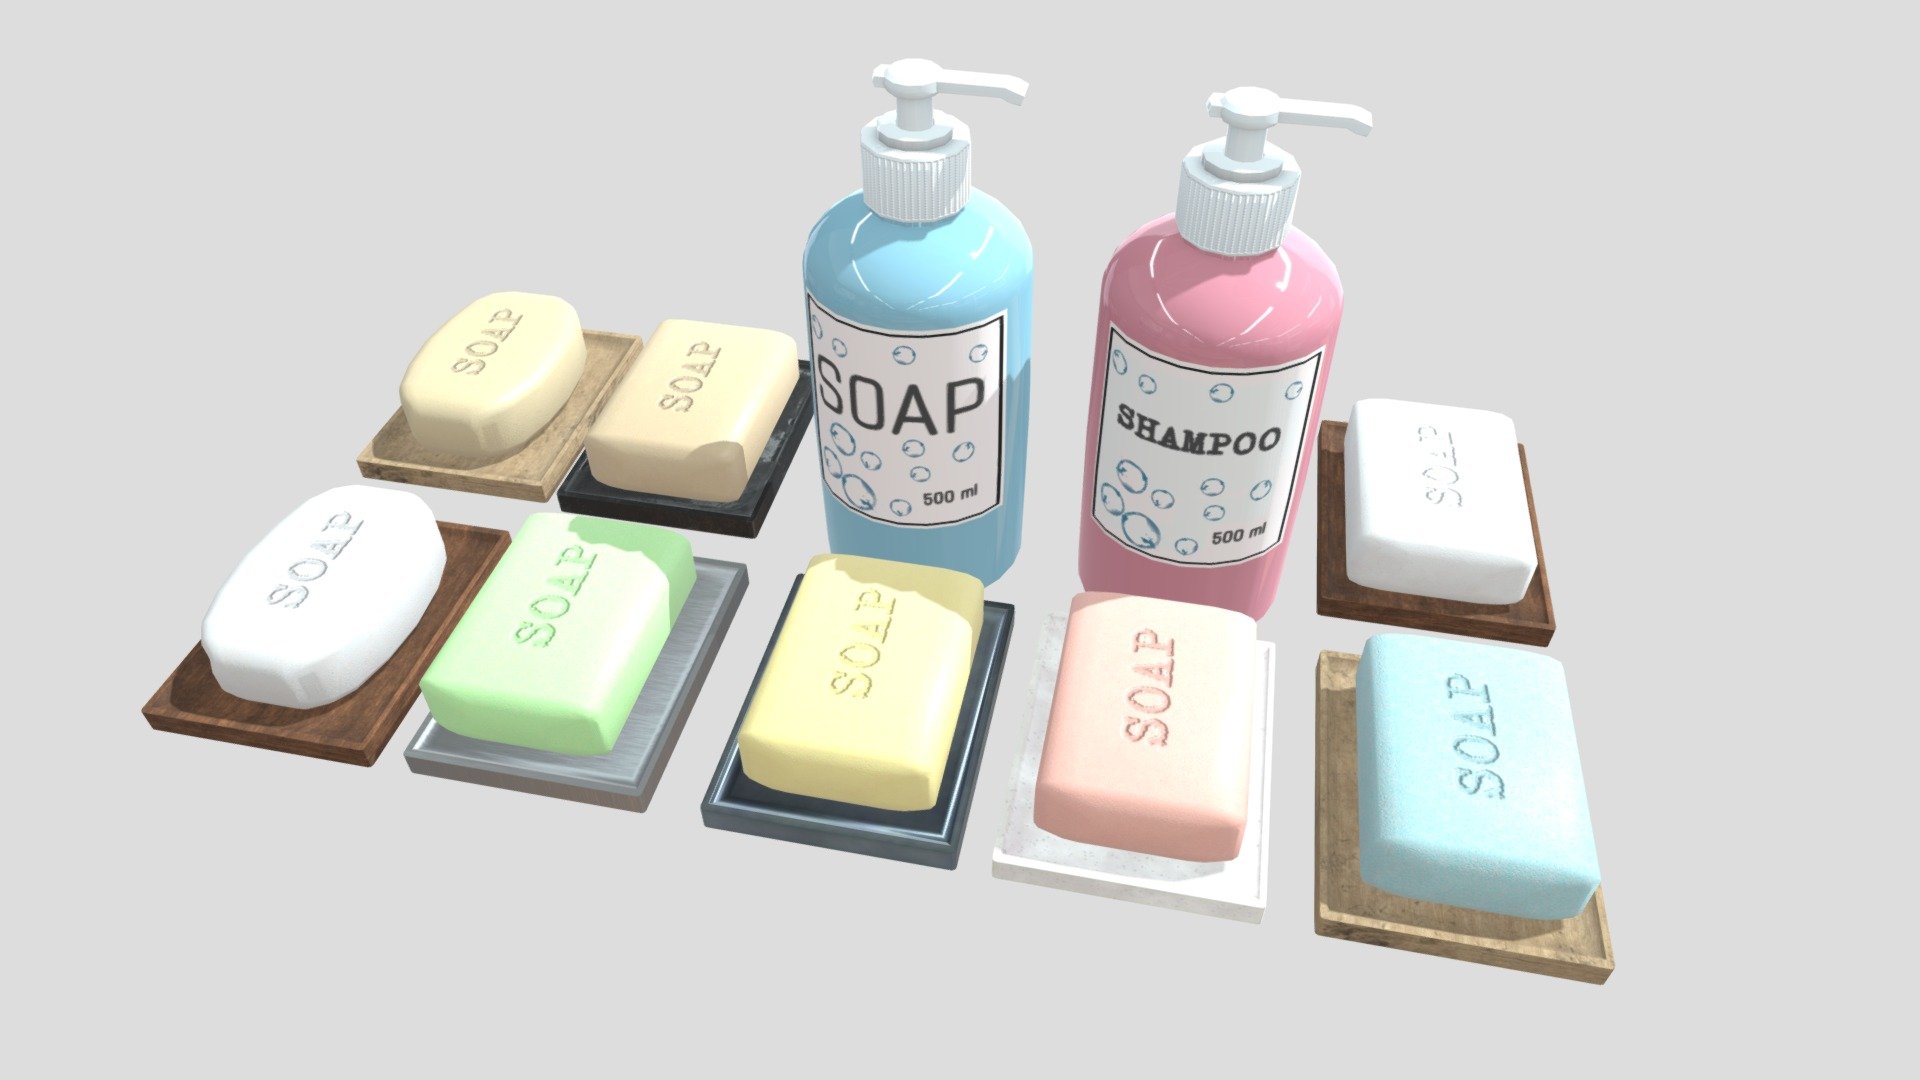 Some sortiment of soap pieces and trays, pump bottles with labels soap and shampoo.

Zip file includes FBX DAE OBJ and PNG formats

Pump bottle has separate parts for pump top 3d model